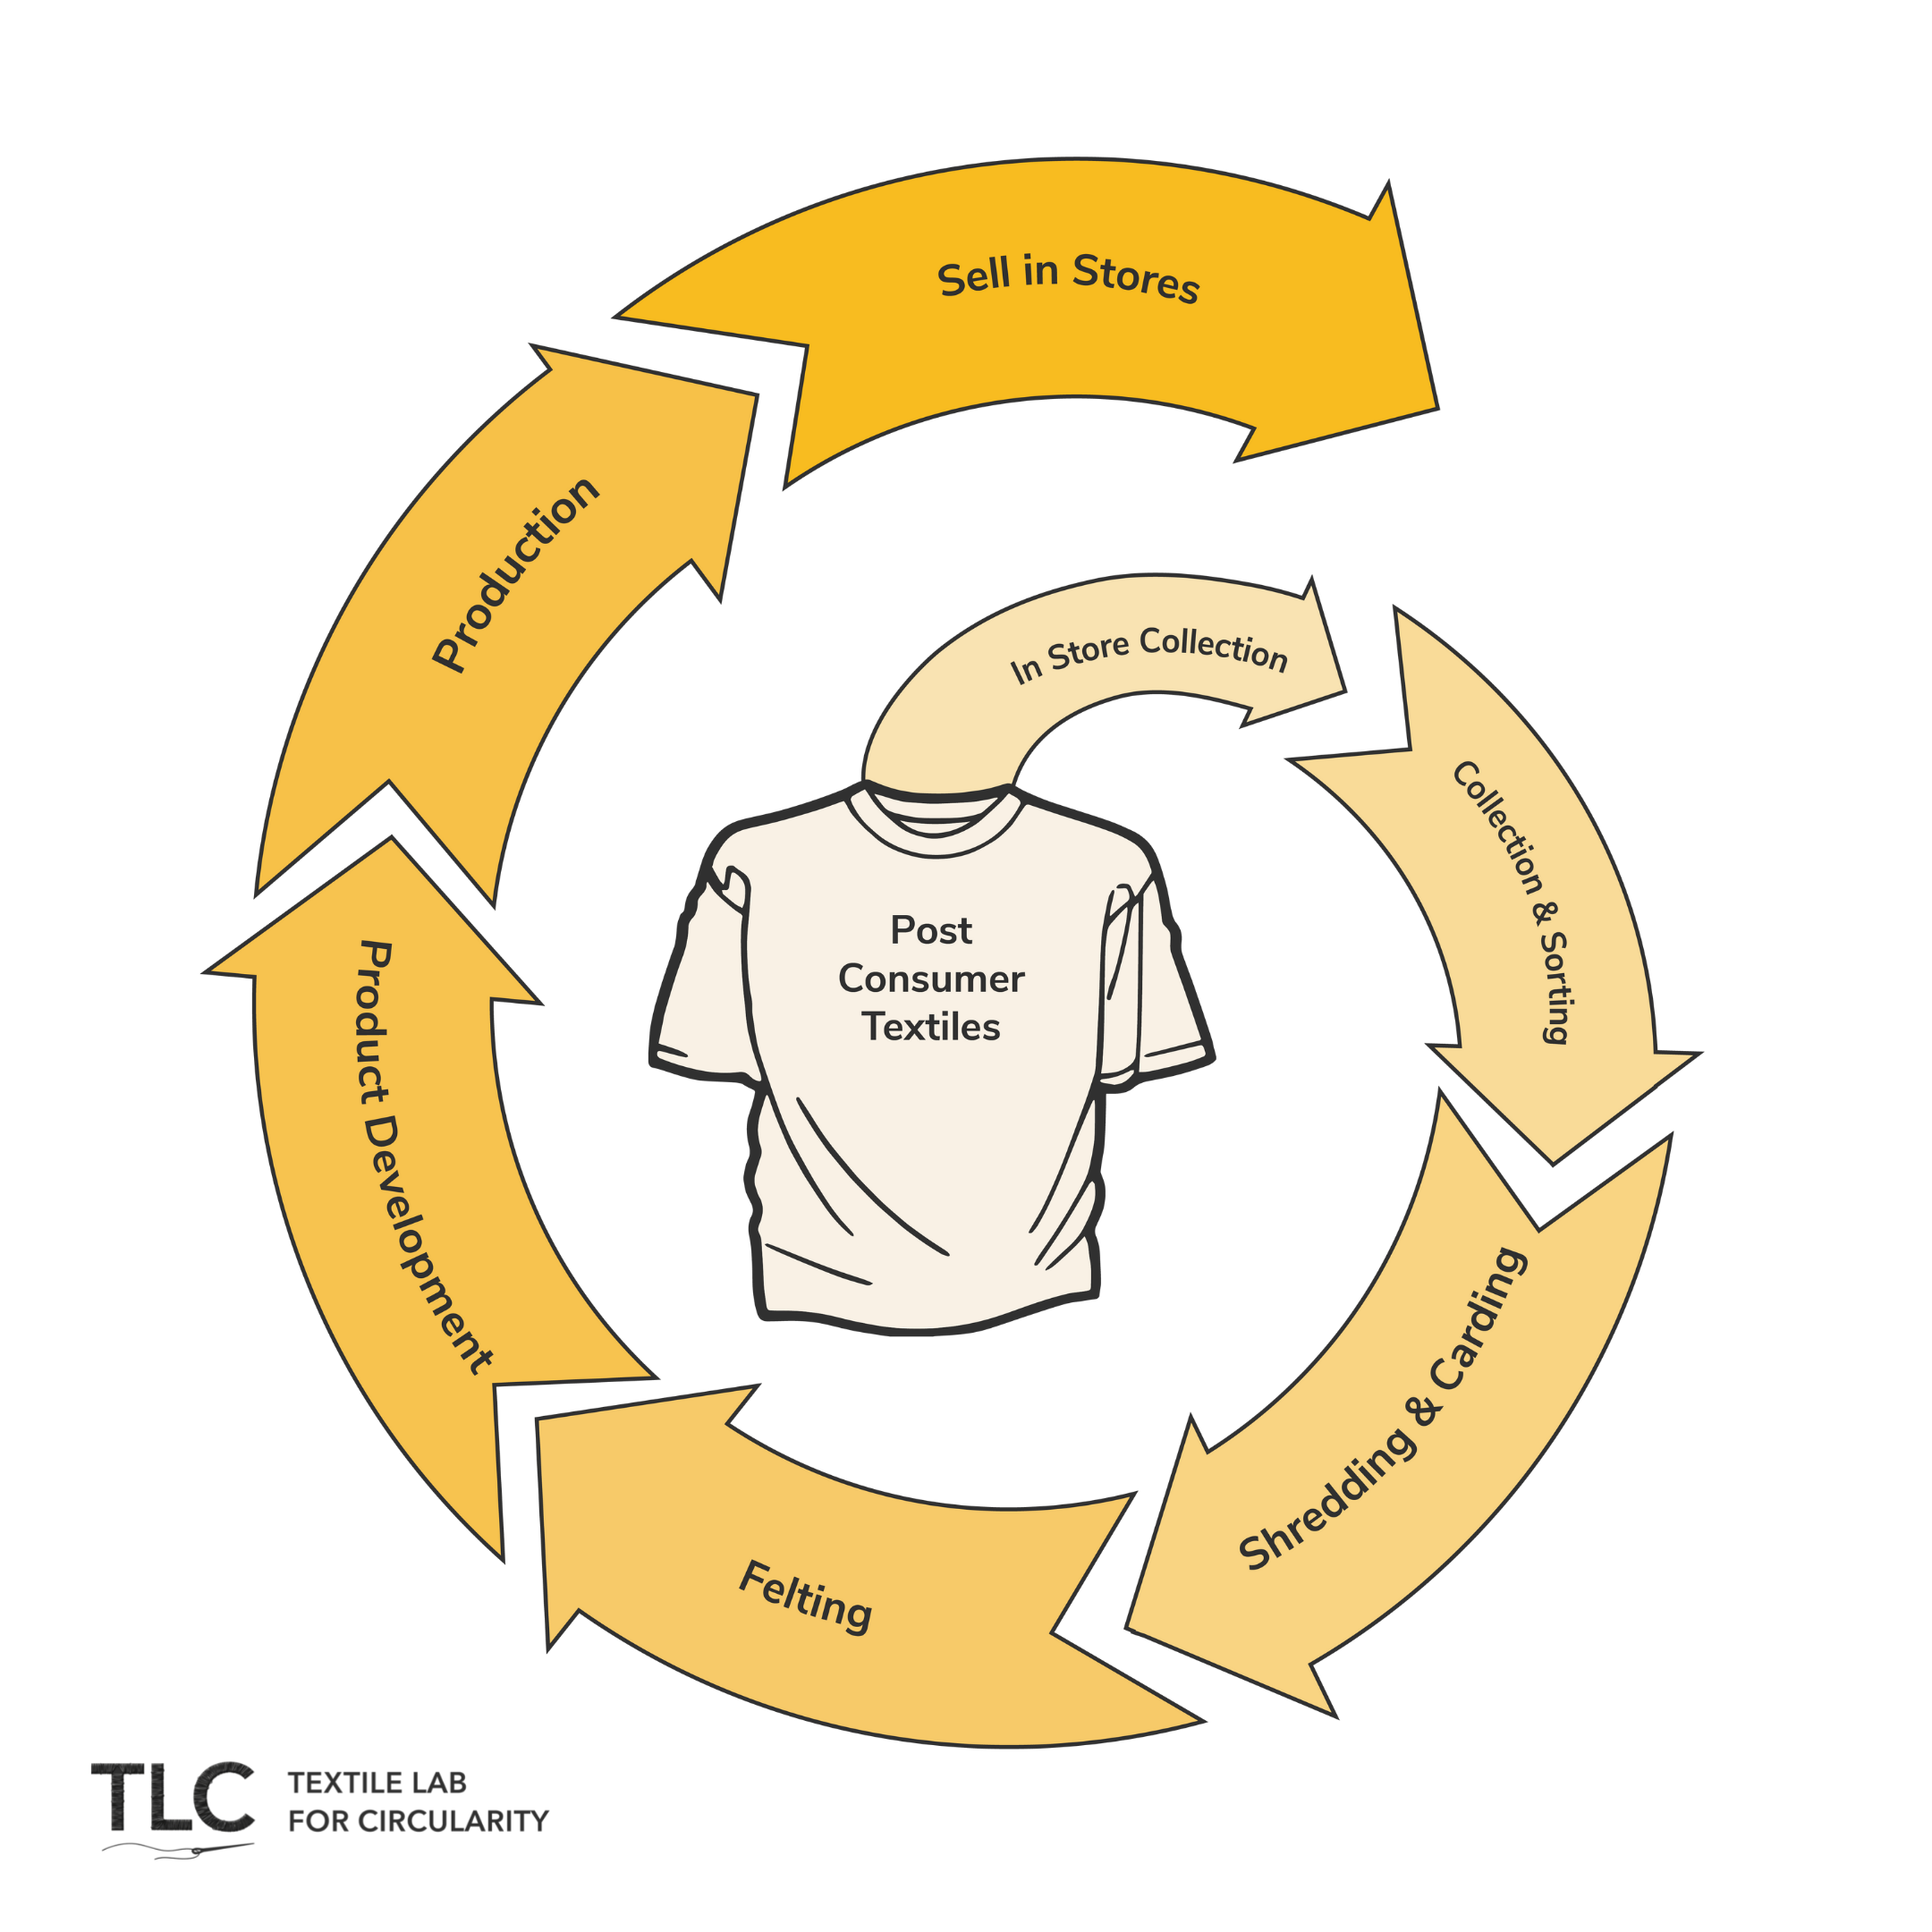 Roadmap for Building a Textile Recycling Pilot - Fashion Takes